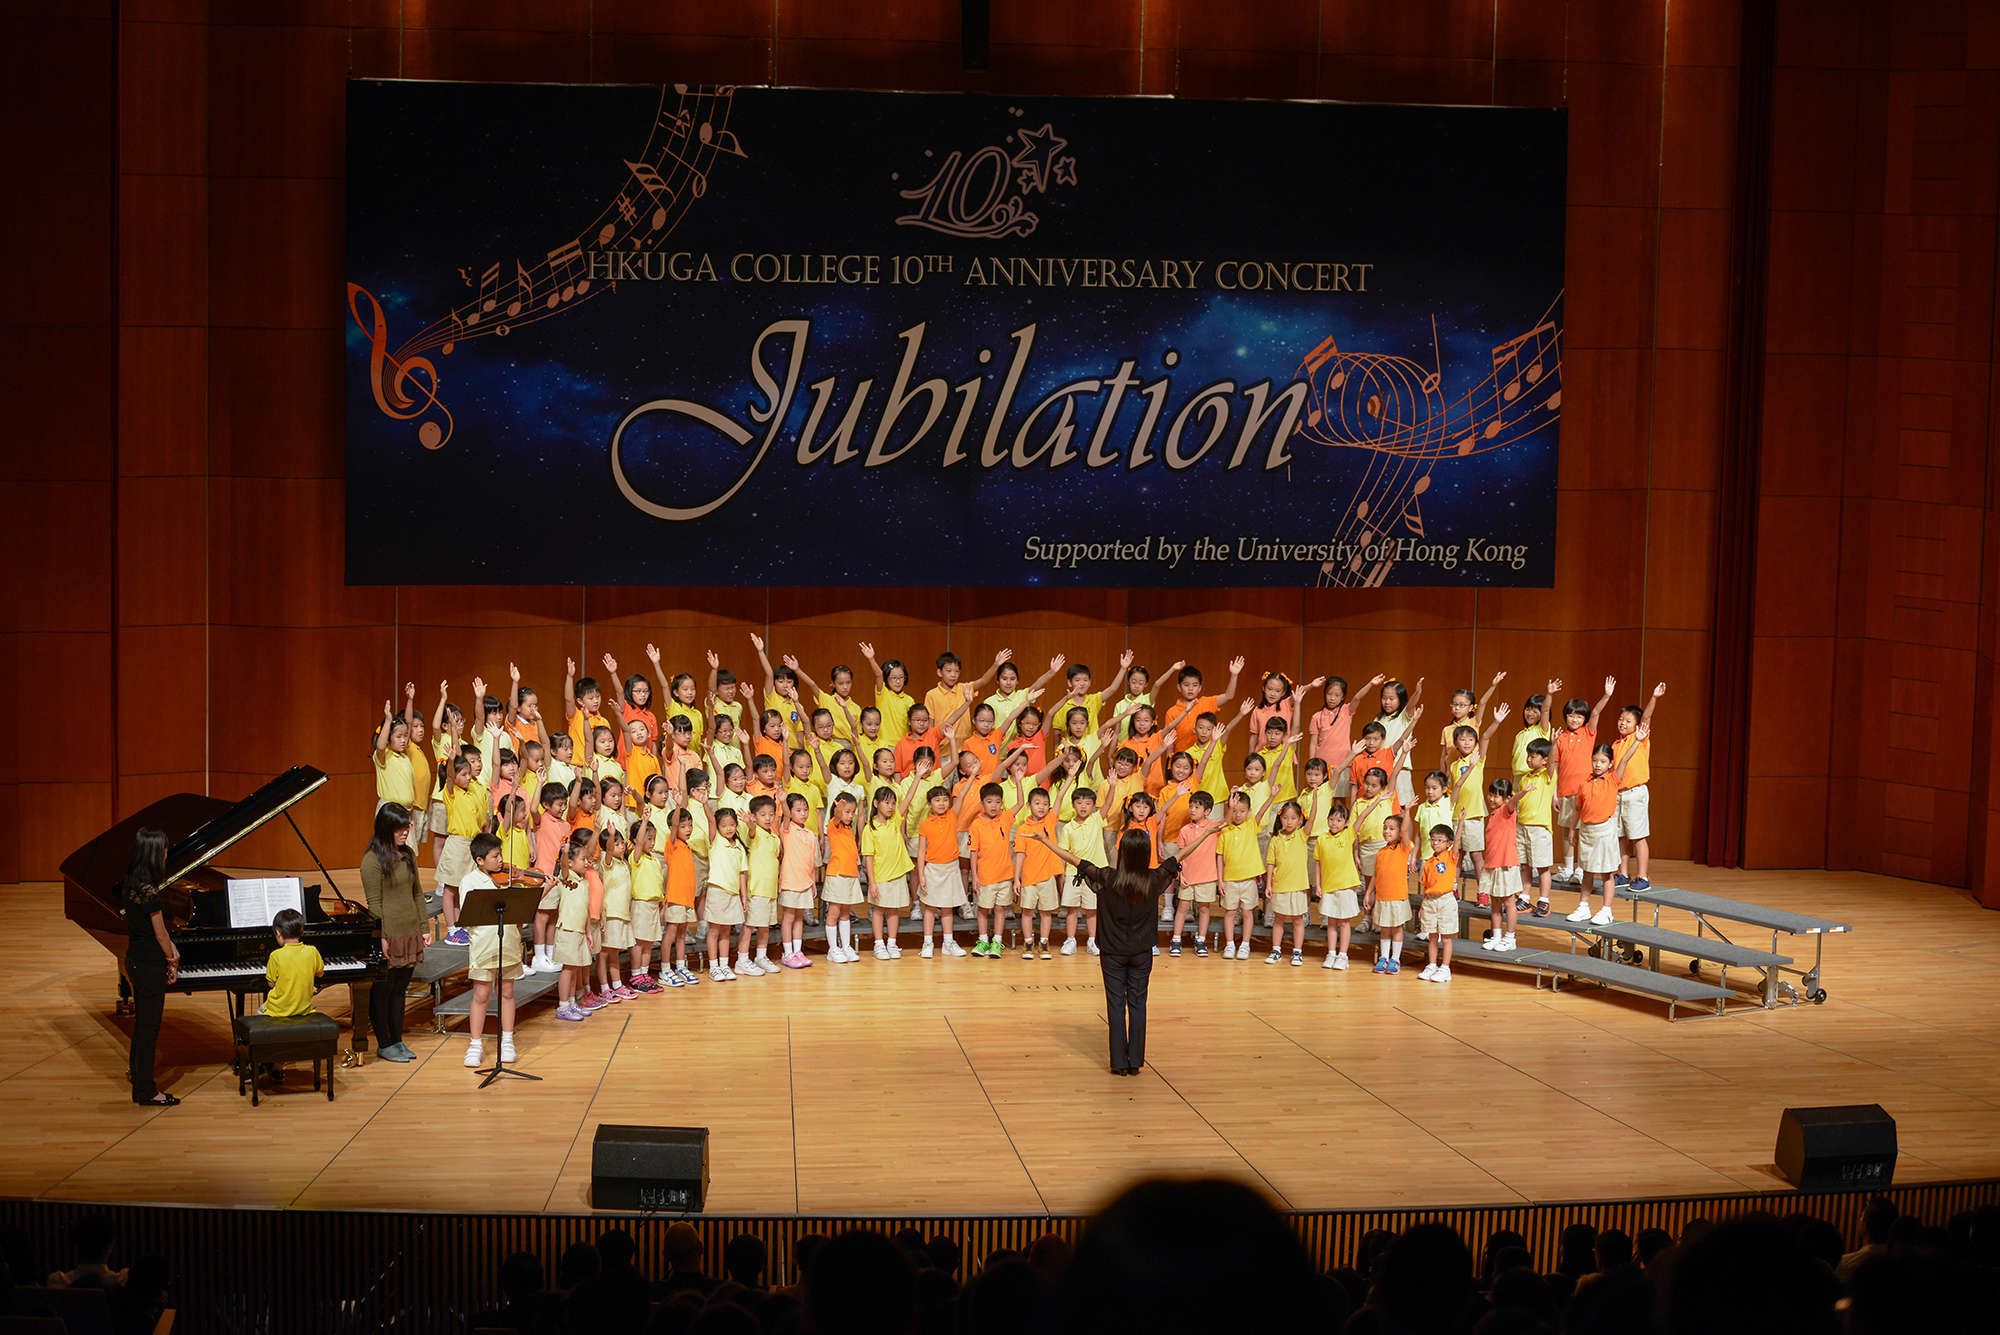 Performance by the HKUGA Primary School Choir.